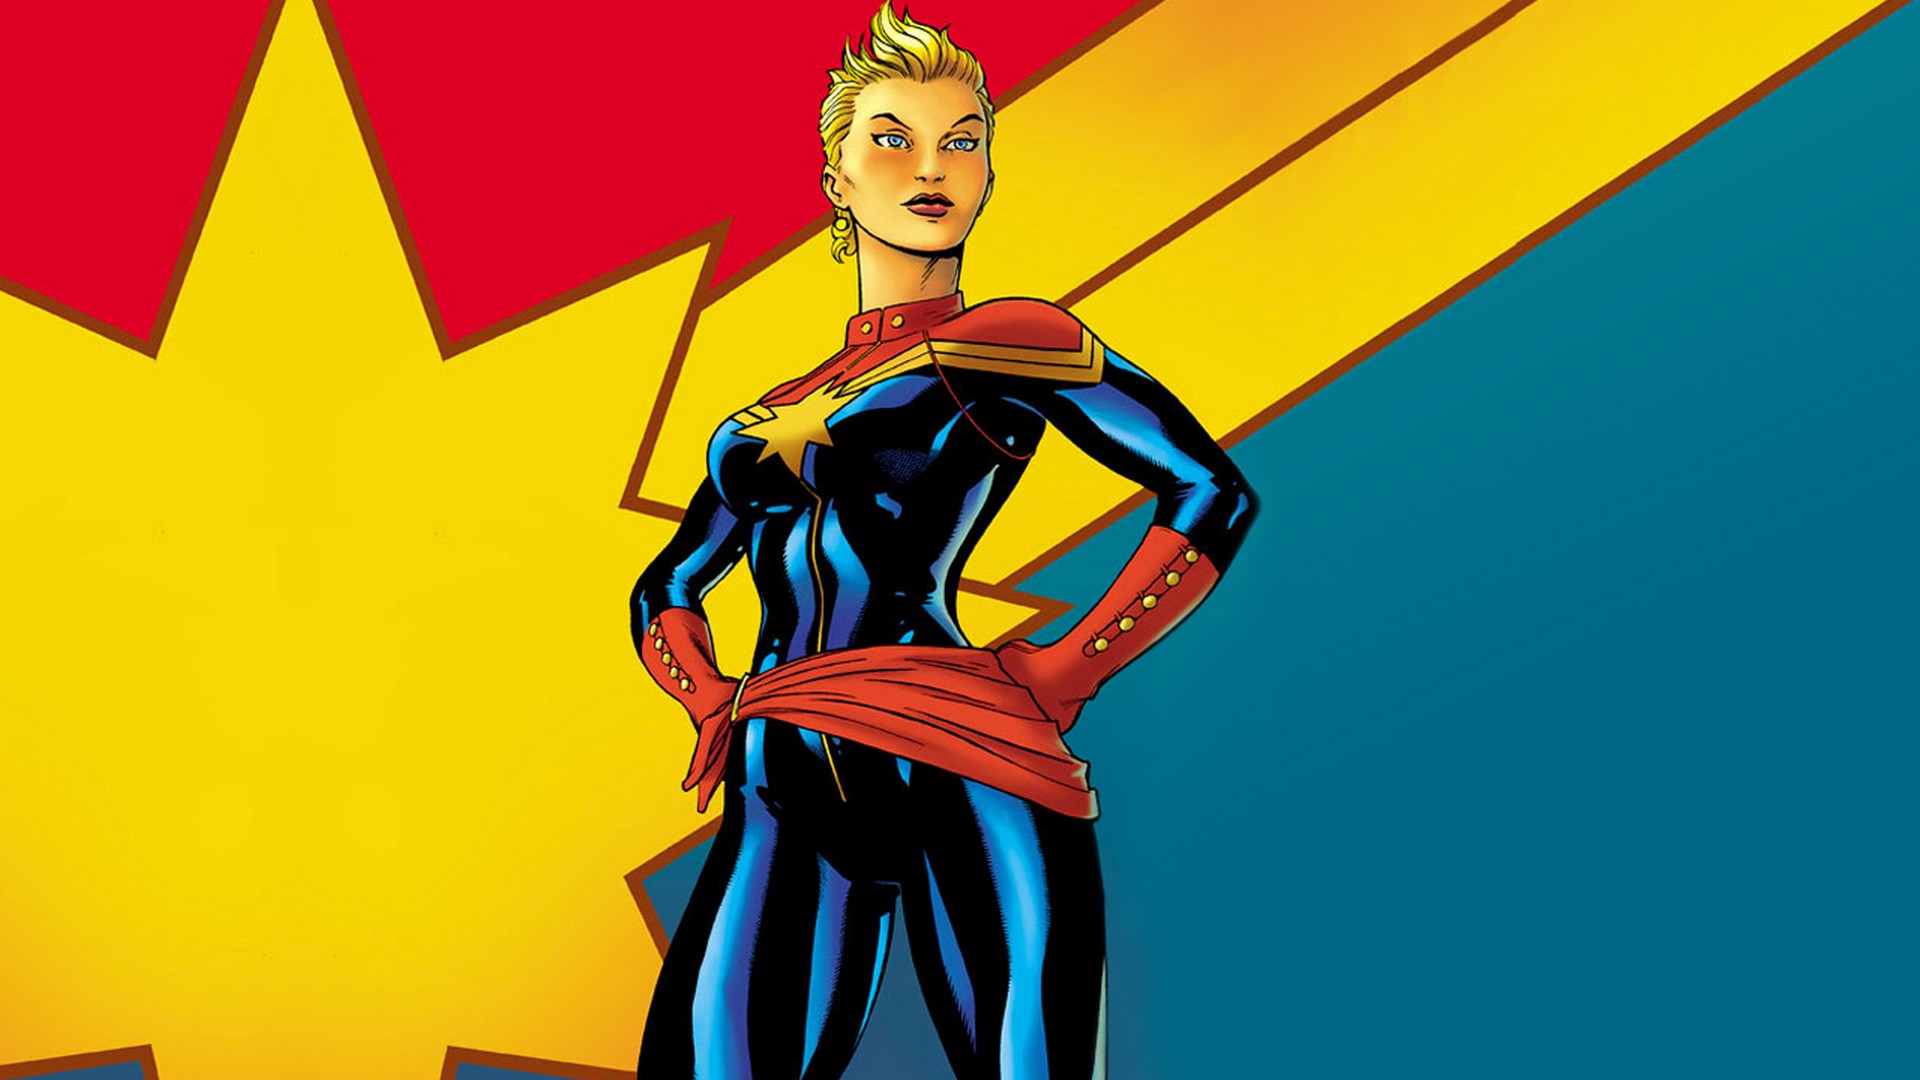 Captain Marvel Animated Full Movie Wallpaper with high-resolution 1920x1080 pixel. You can use this poster wallpaper for your Desktop Computers, Mac Screensavers, Windows Backgrounds, iPhone Wallpapers, Tablet or Android Lock screen and another Mobile device